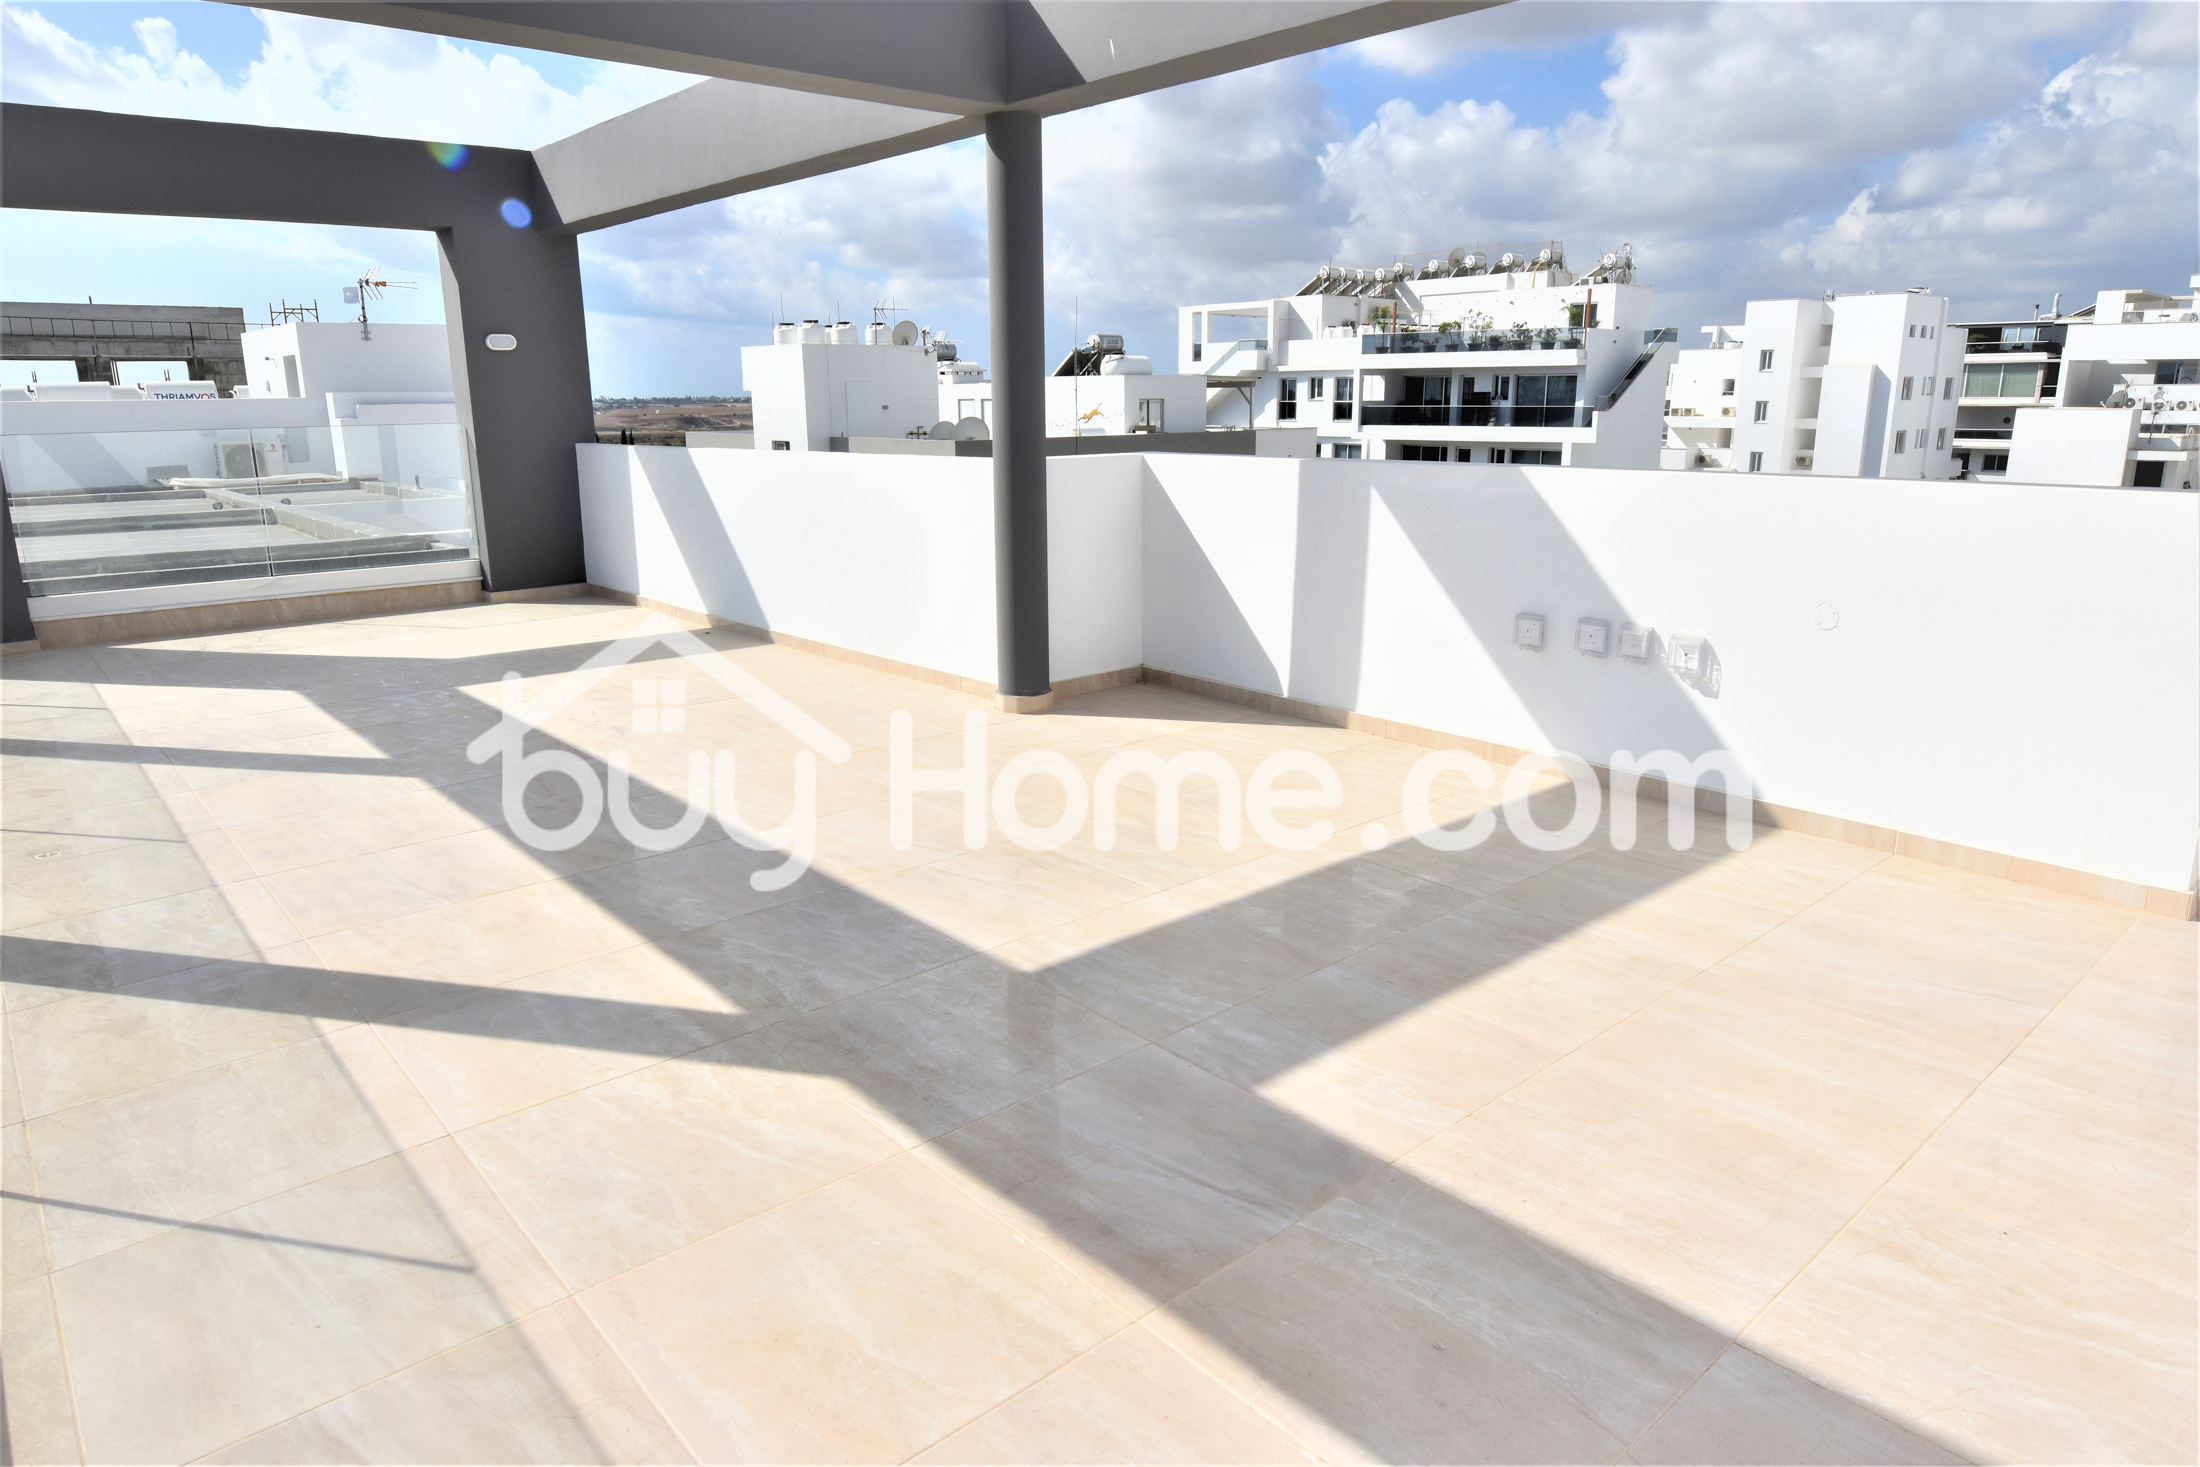 3 Bed Penthouse Roof Garden | BuyHome